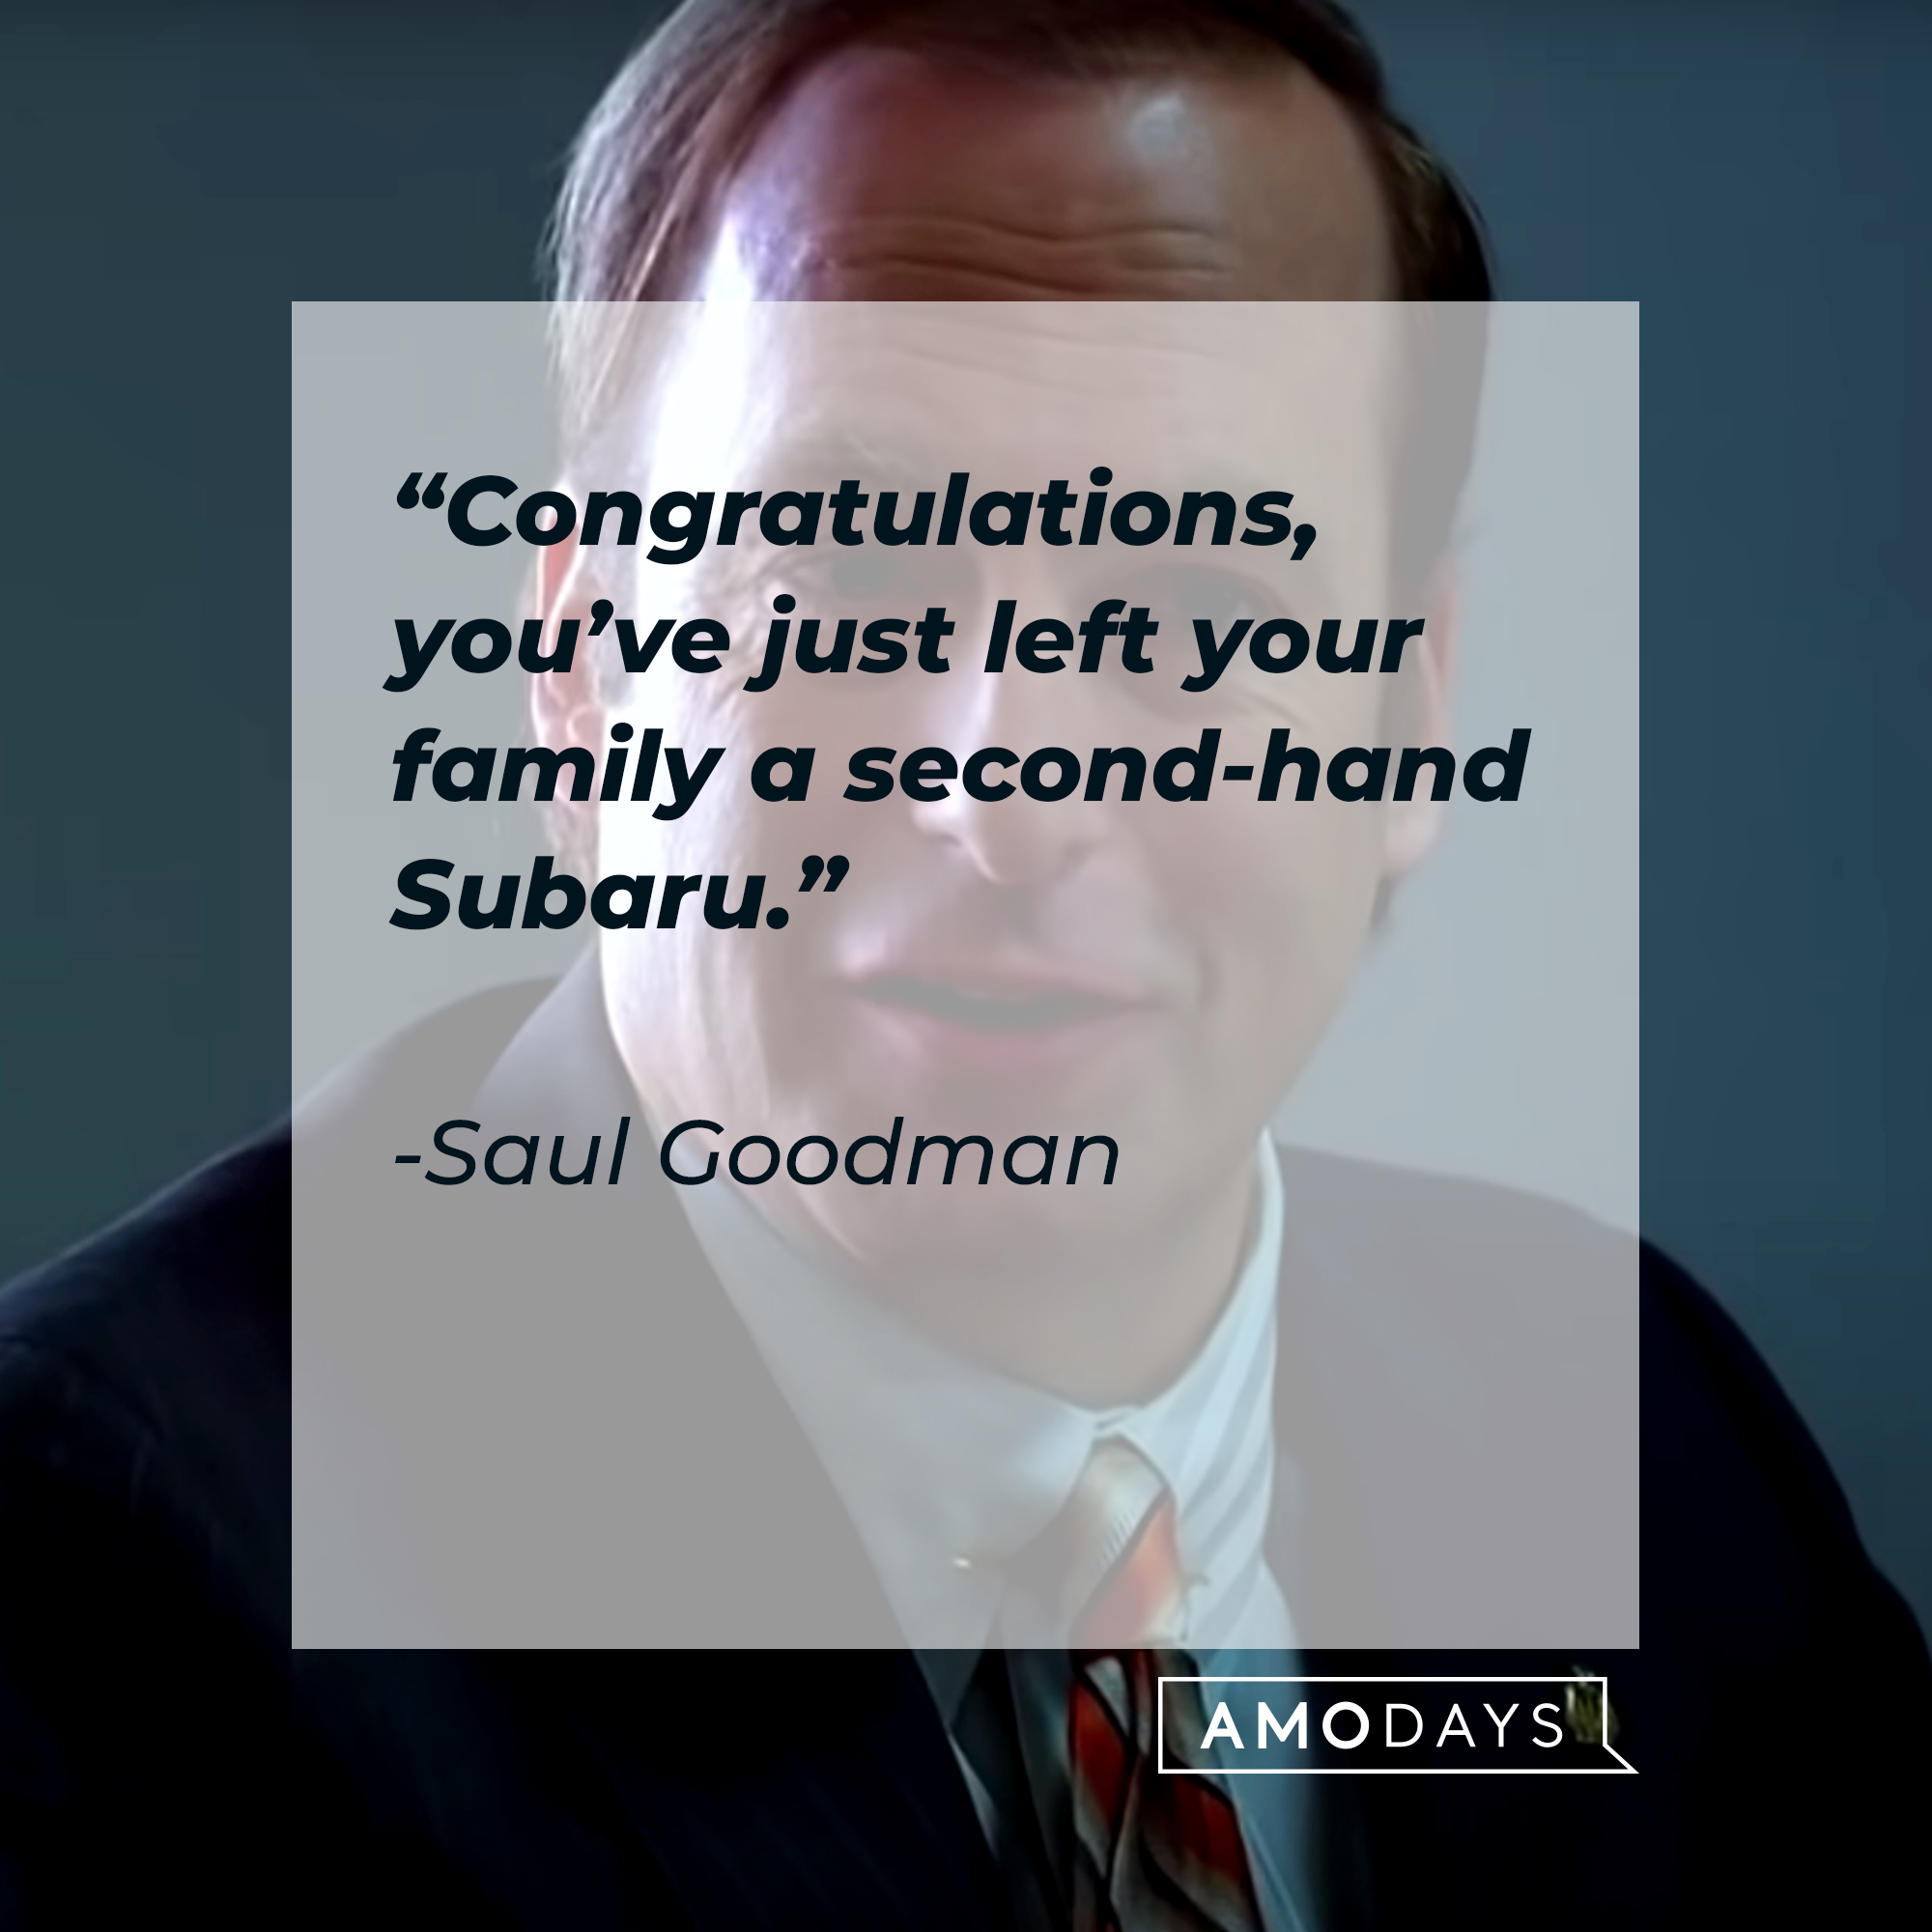 An image of Saul Goodman, with his quote: “Congratulations, you’ve just left your family a second-hand Subaru.” | Source: Youtube.com/breakingbad